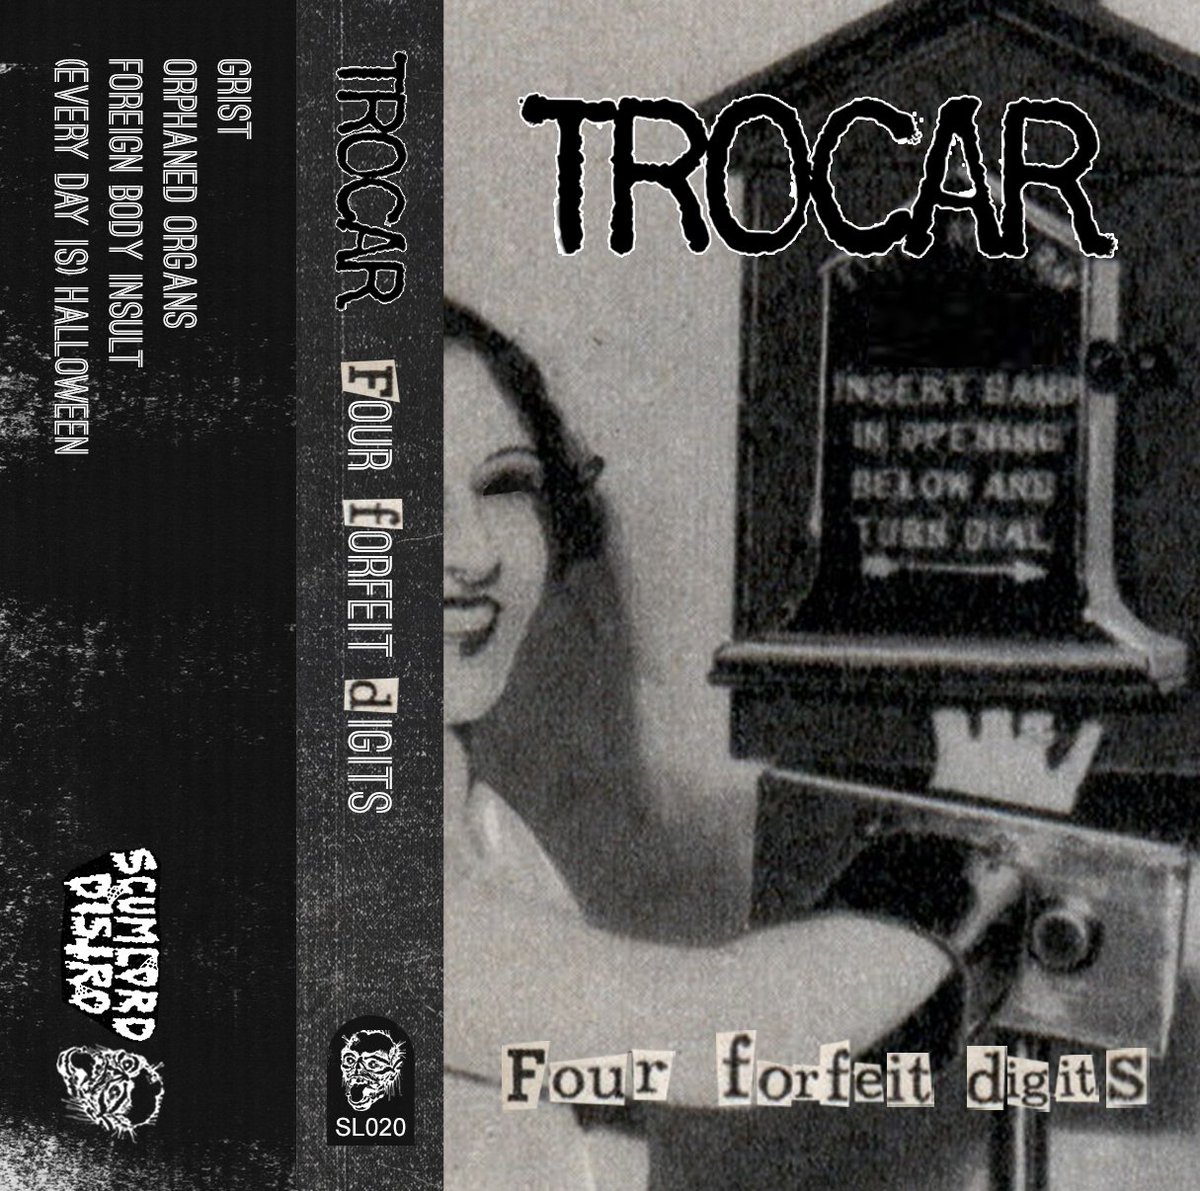 We have a new band called Trocar. Here's a little demo of what's coming next with a Ministry cover tossed on just to agitate. Check out @thetrocar page to stay apprised to anything relevant and get a free download here: thetrocar.bandcamp.com